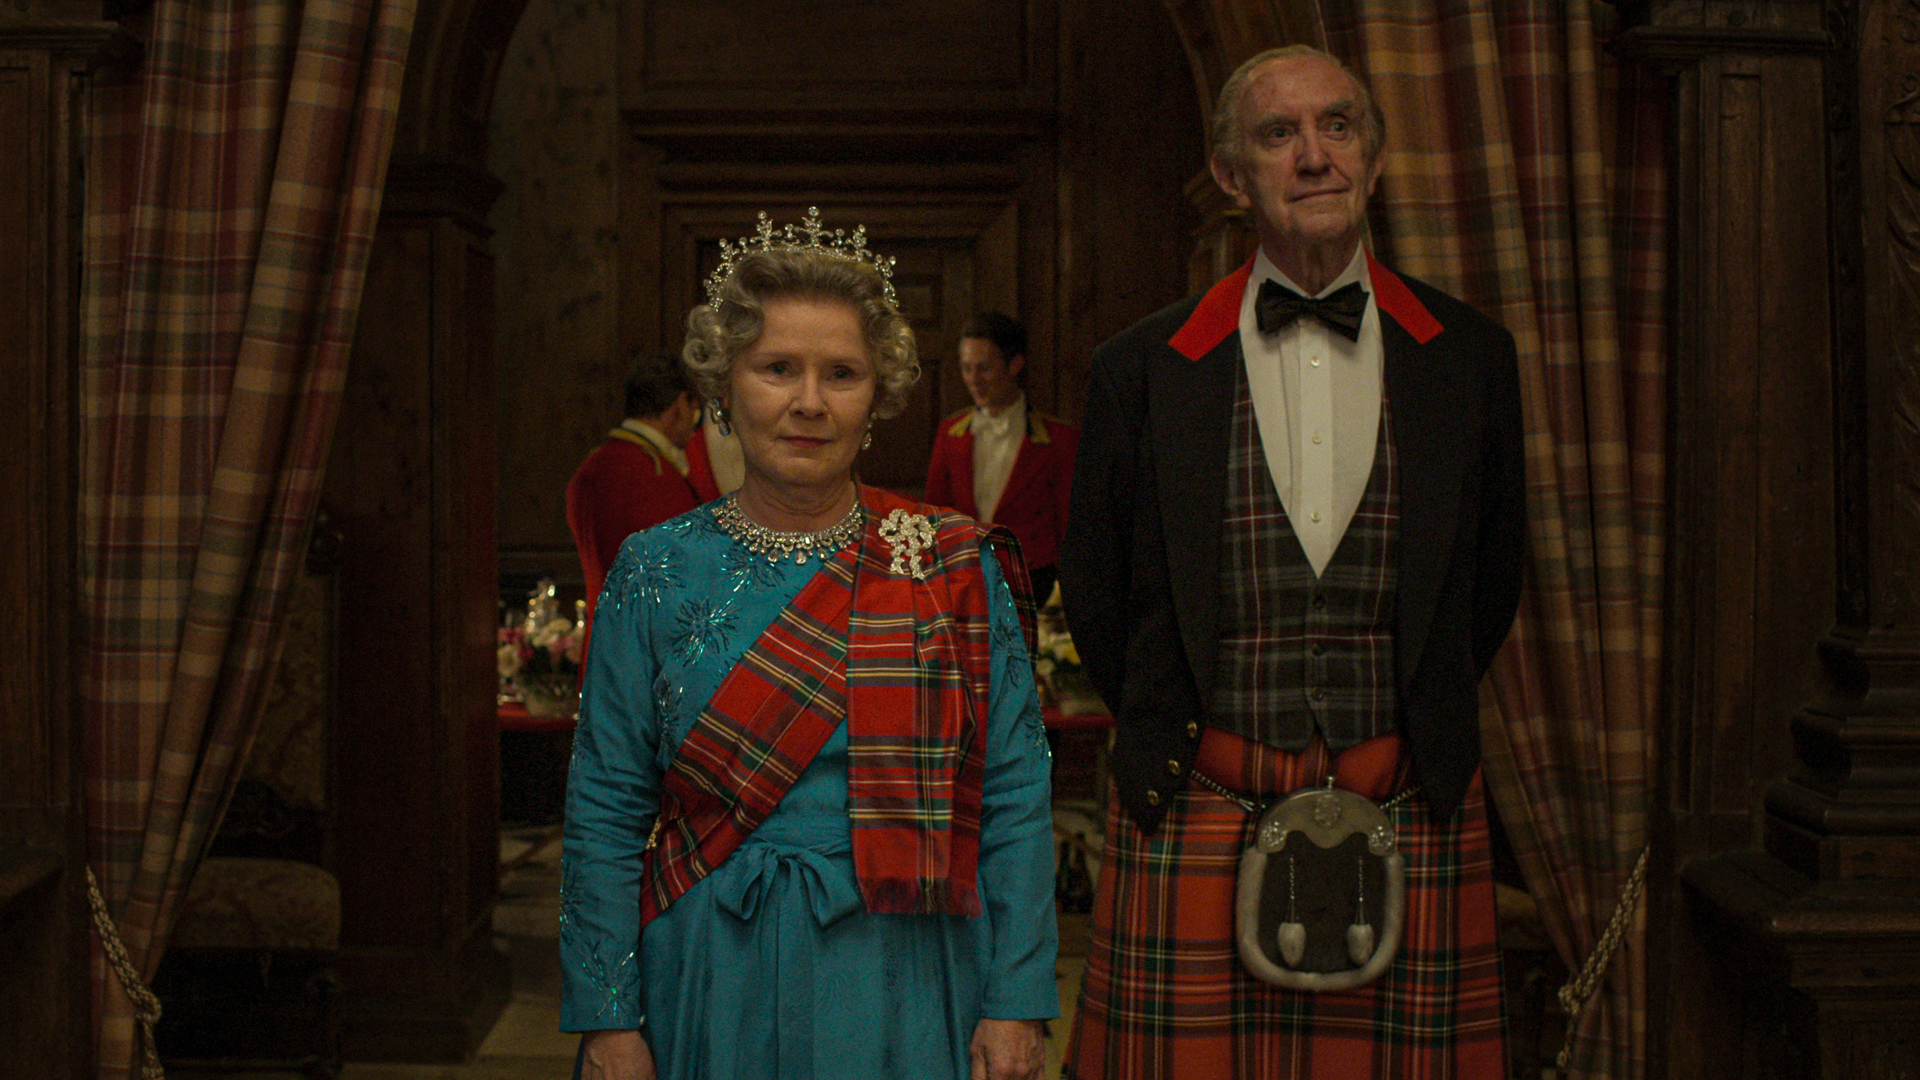 Queen Elizabeth II and Prince Phillip stand in tartan clothes in The Crown season 5